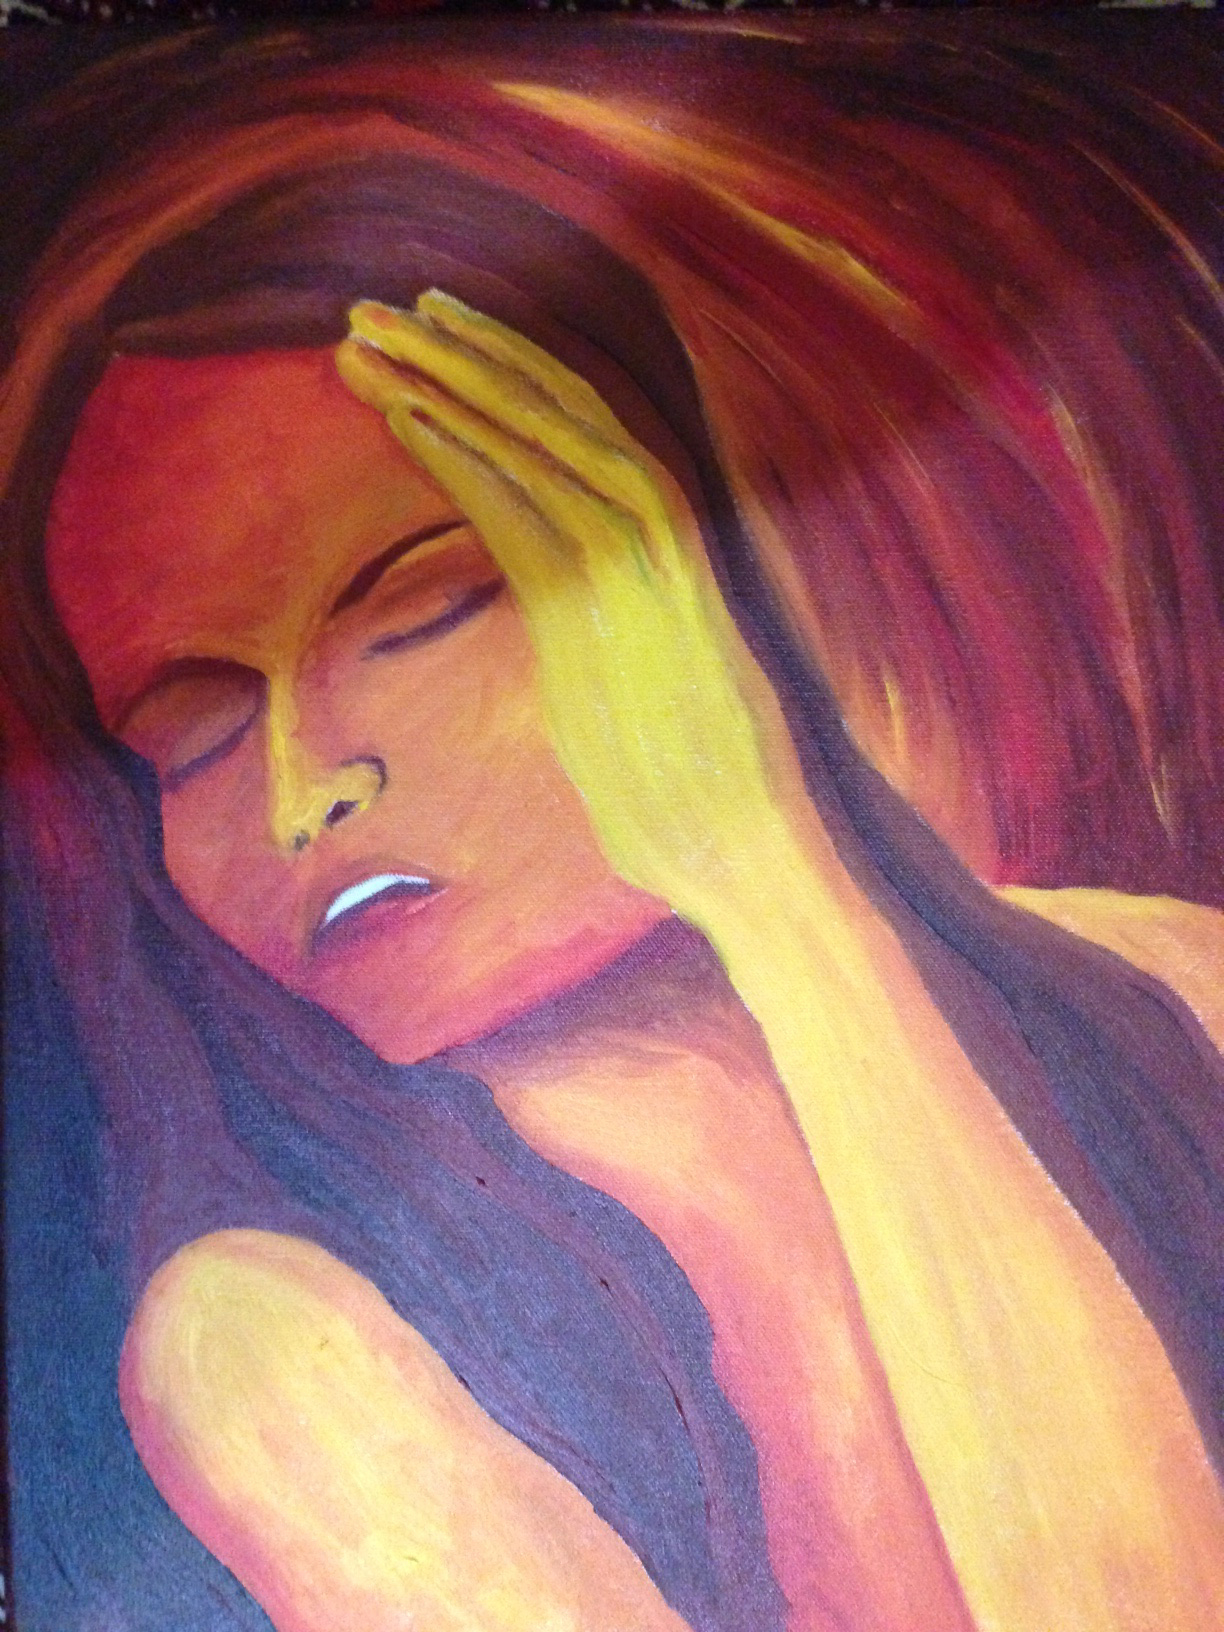 Oil painting of a woman holding her head, frowning